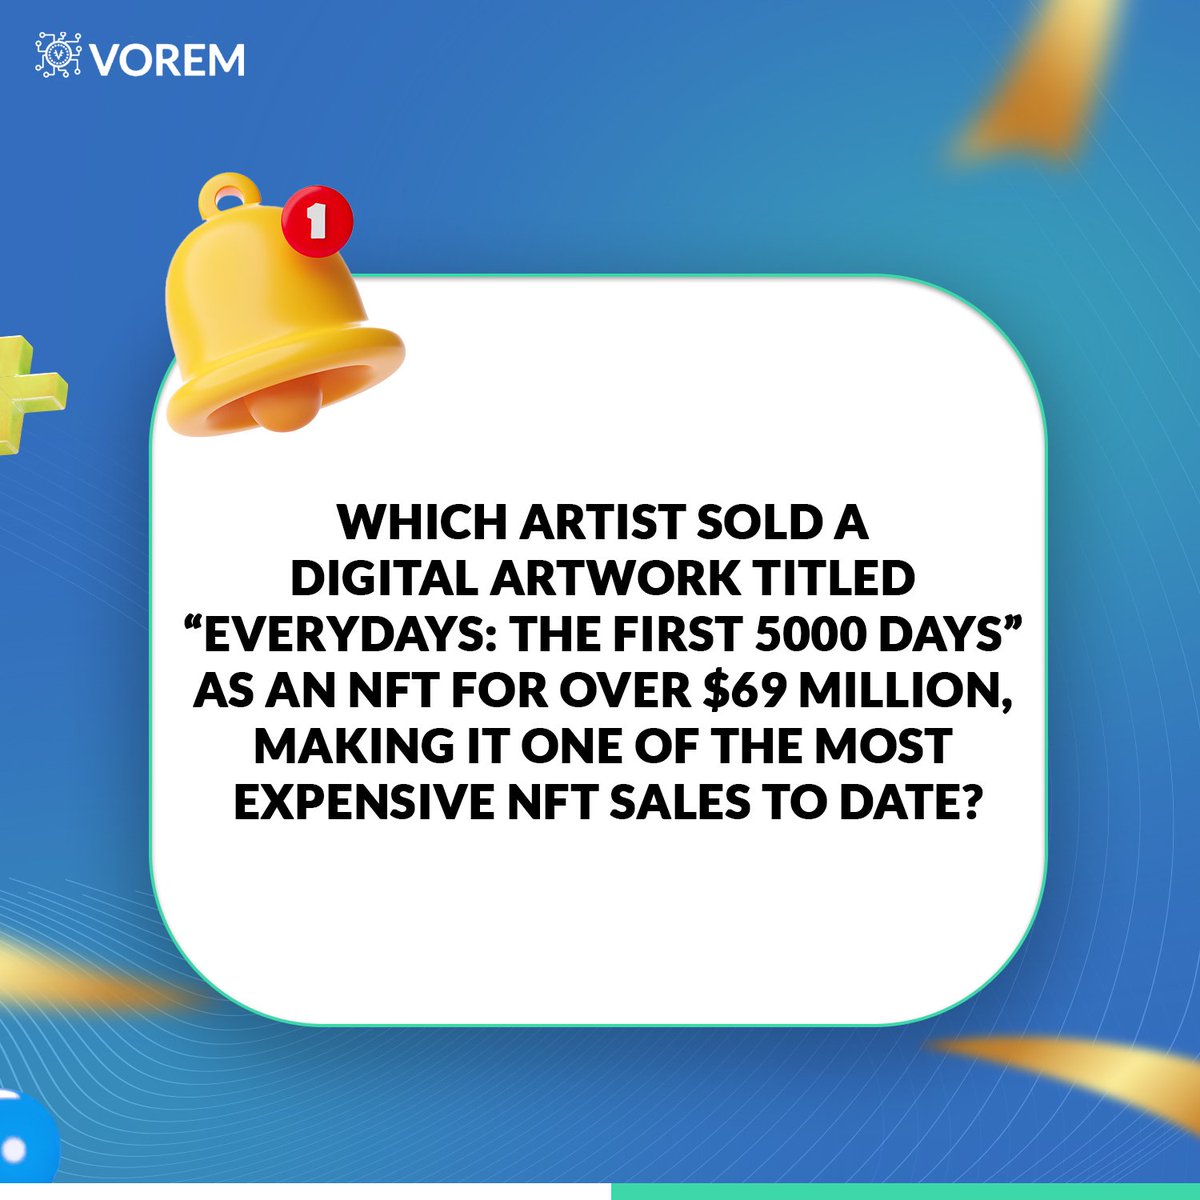 Did you know? 

Someone made history with 'Everydays: The First 5000 Days,' selling it as an NFT for over $69 million, marking a milestone in digital art?

Who’s this person? Tell us in the comment

#triviatuesday
#LearnWithVorem 
#nftmarketplaces 
#NFTs 
#Voremacademy